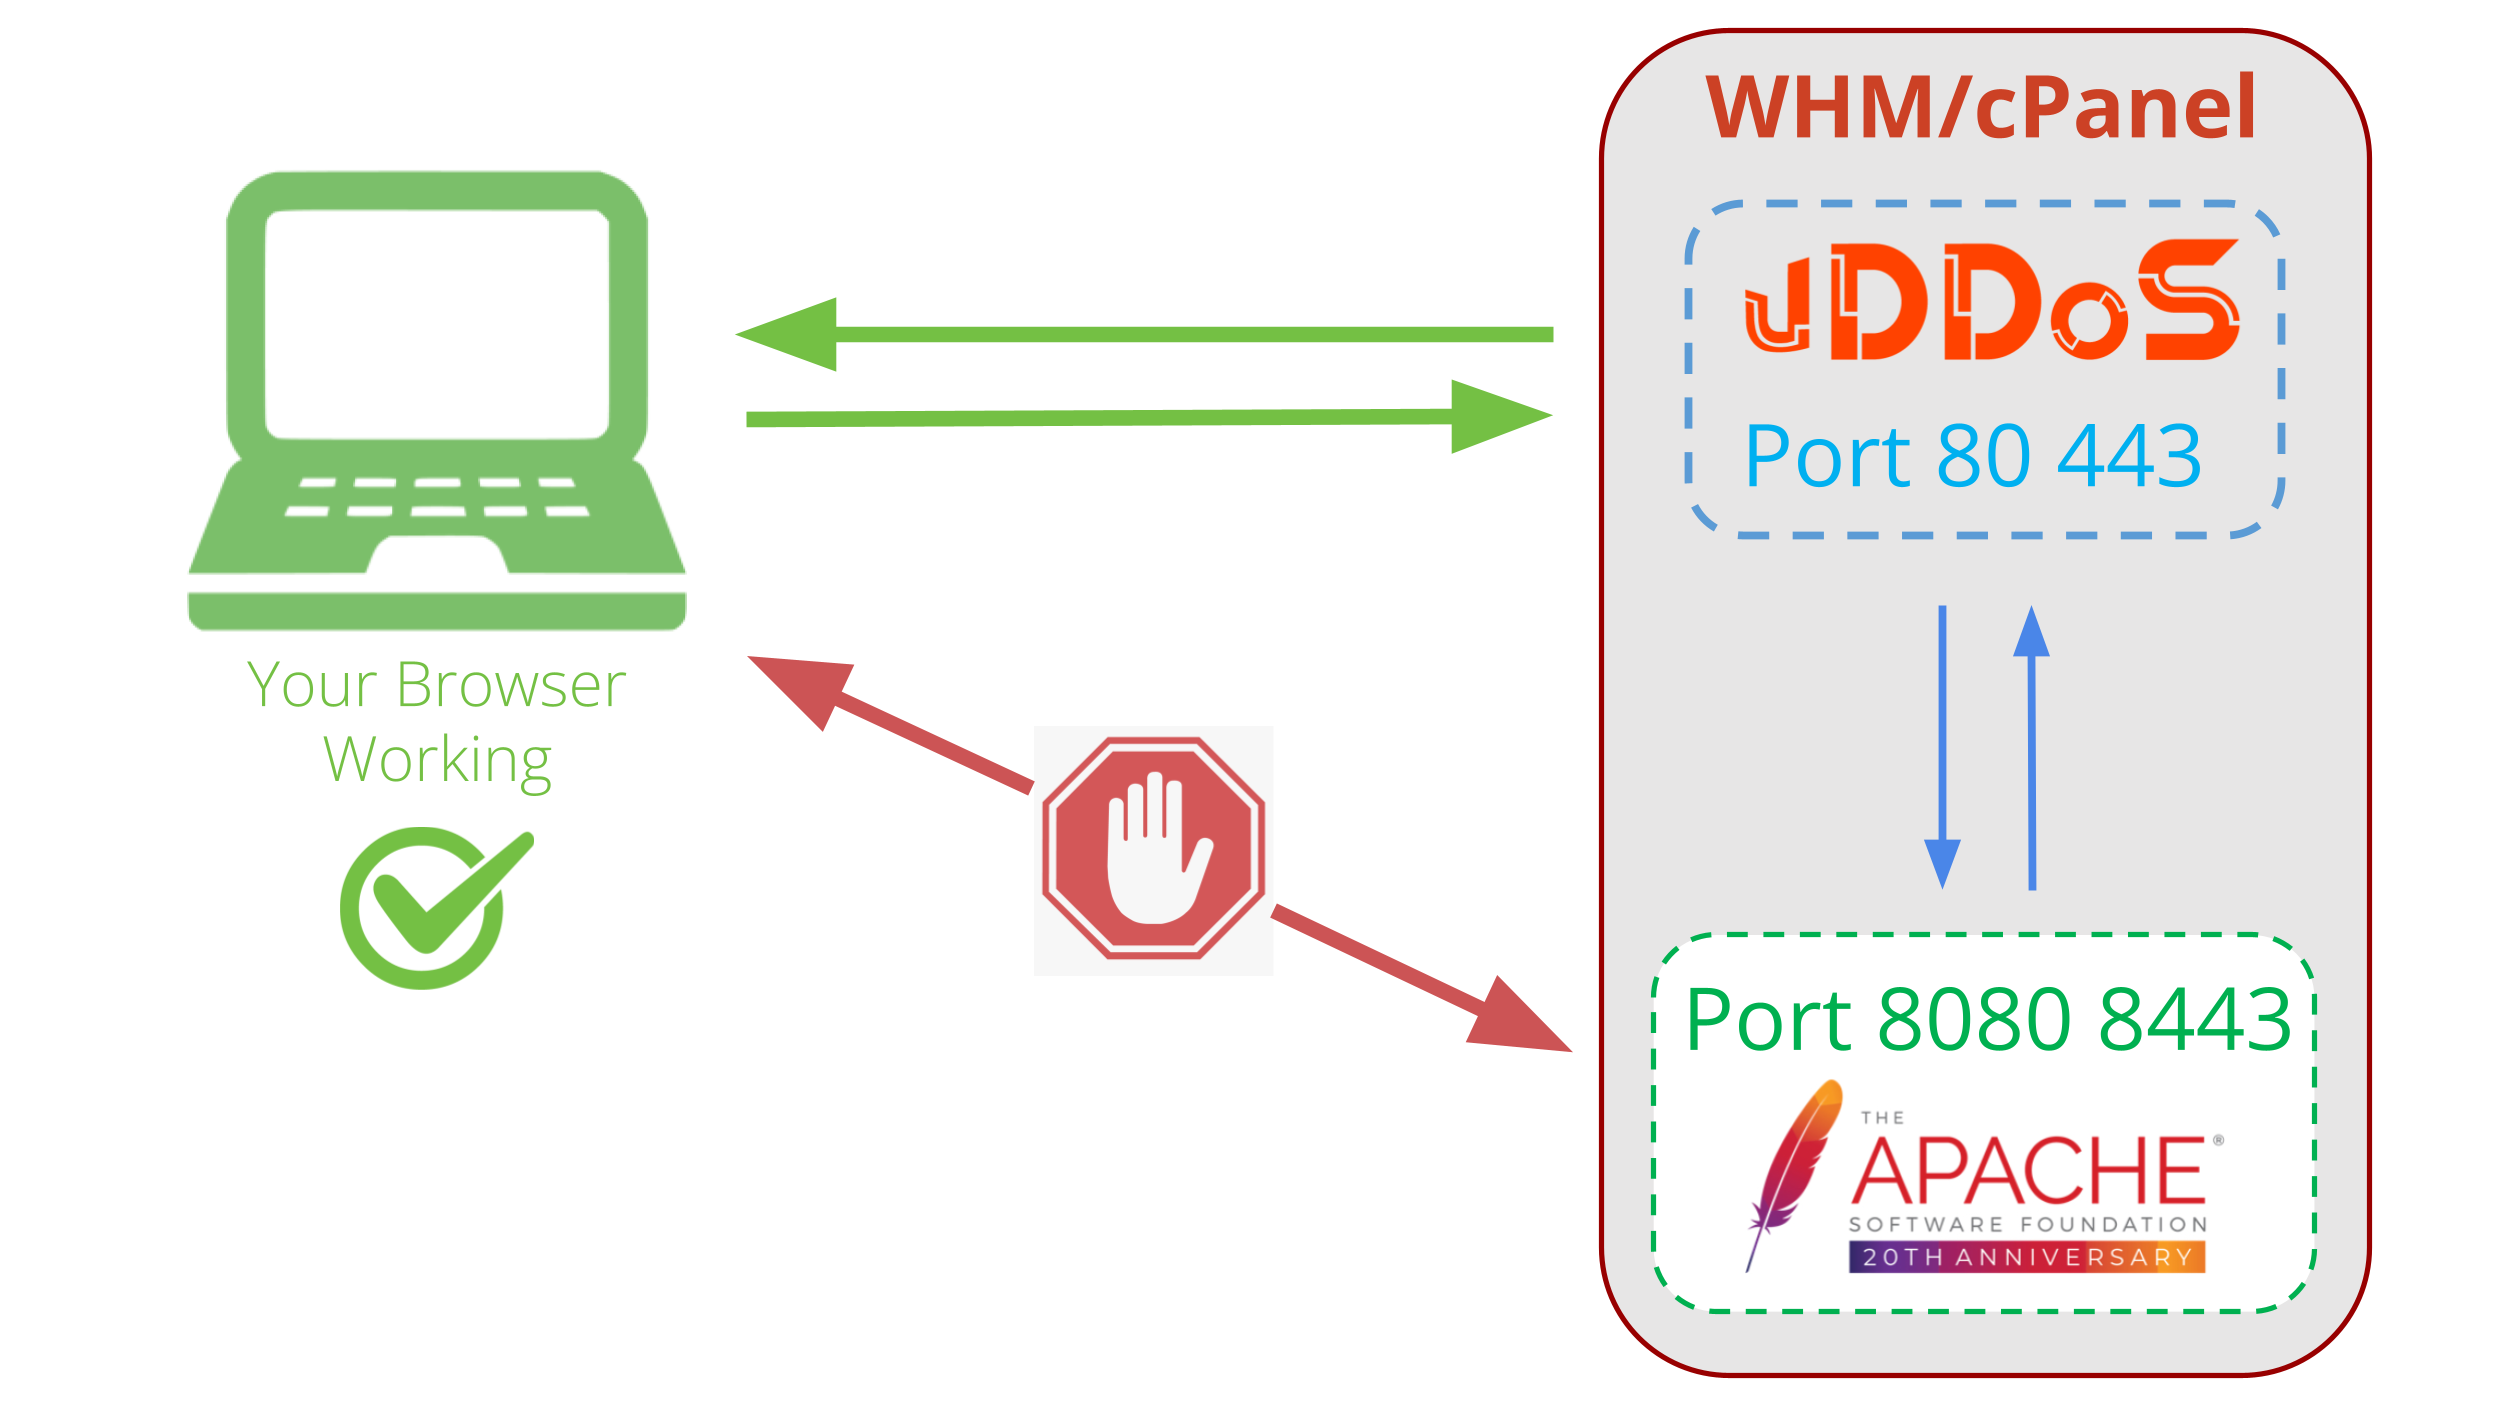 AntiDDoS-for-WHM-cPanel-with-vDDoS-Proxy-Protection1.png